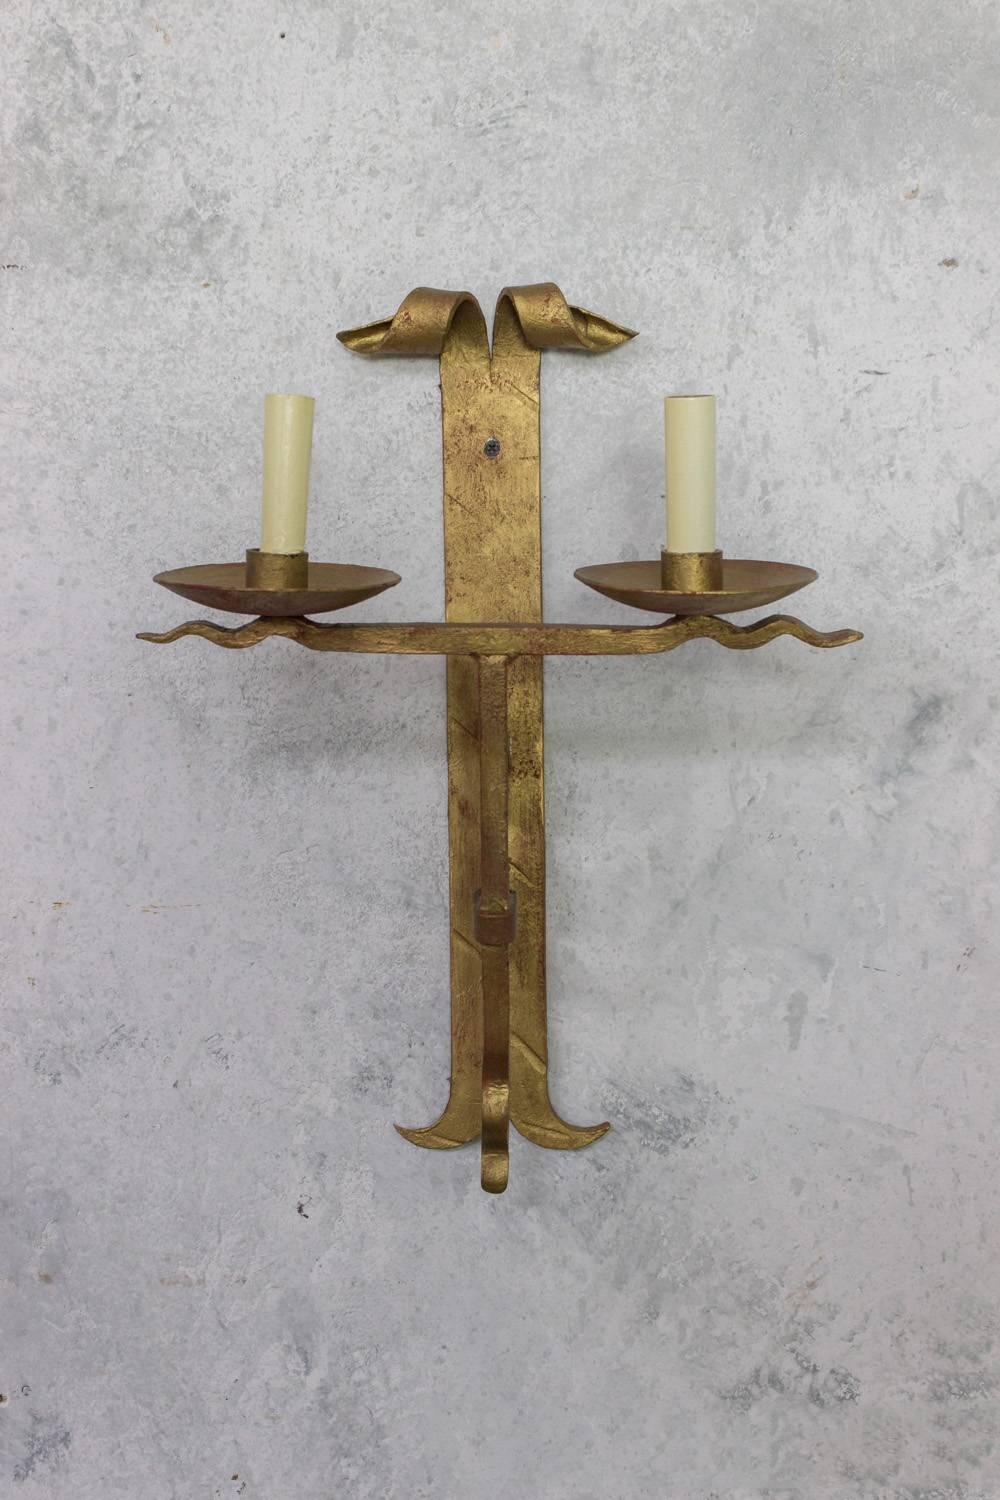 French wrought iron sconces with scrolled heads, circa 1950.